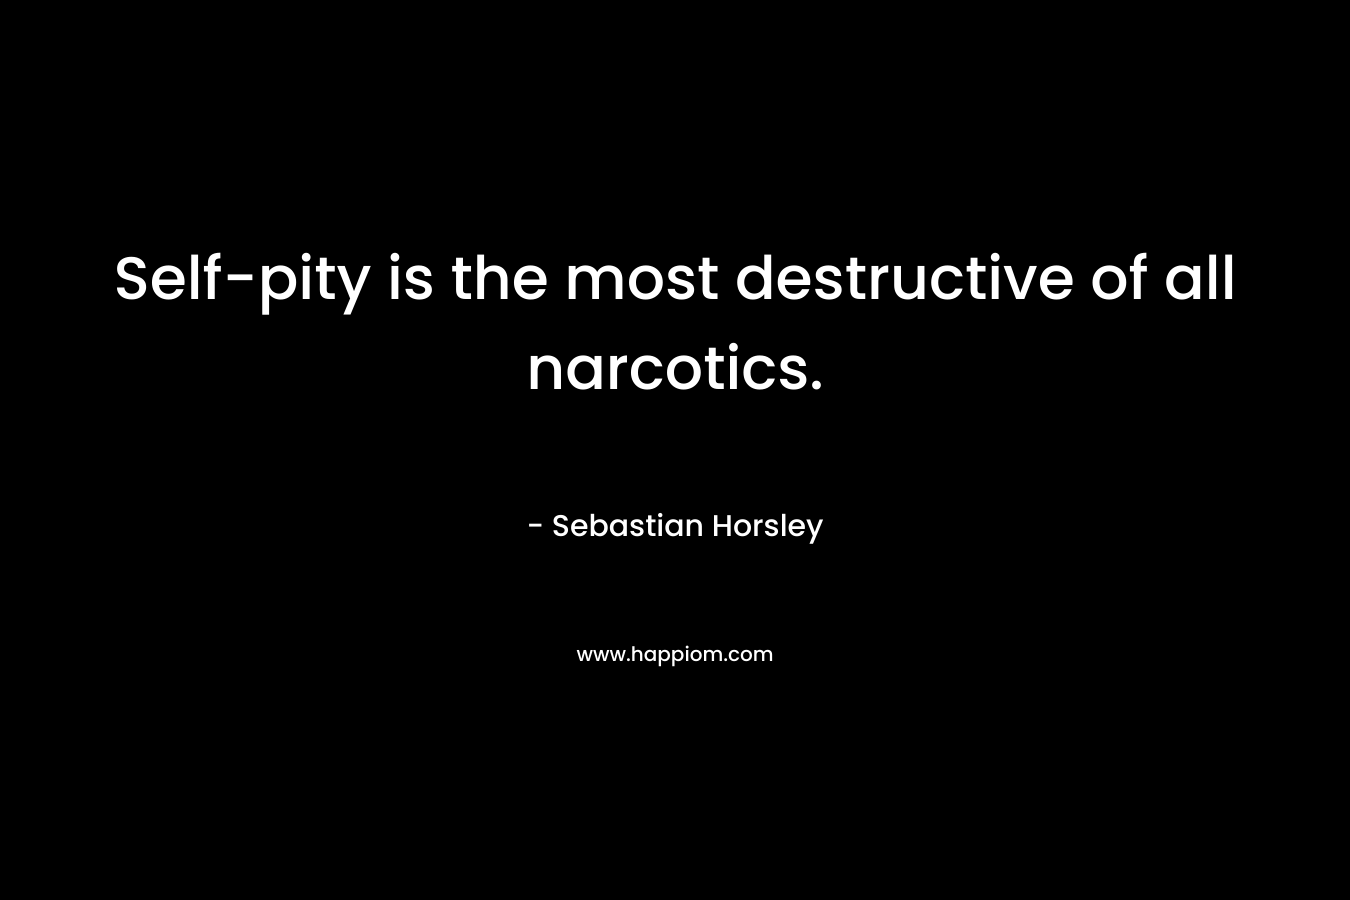 Self-pity is the most destructive of all narcotics. – Sebastian Horsley